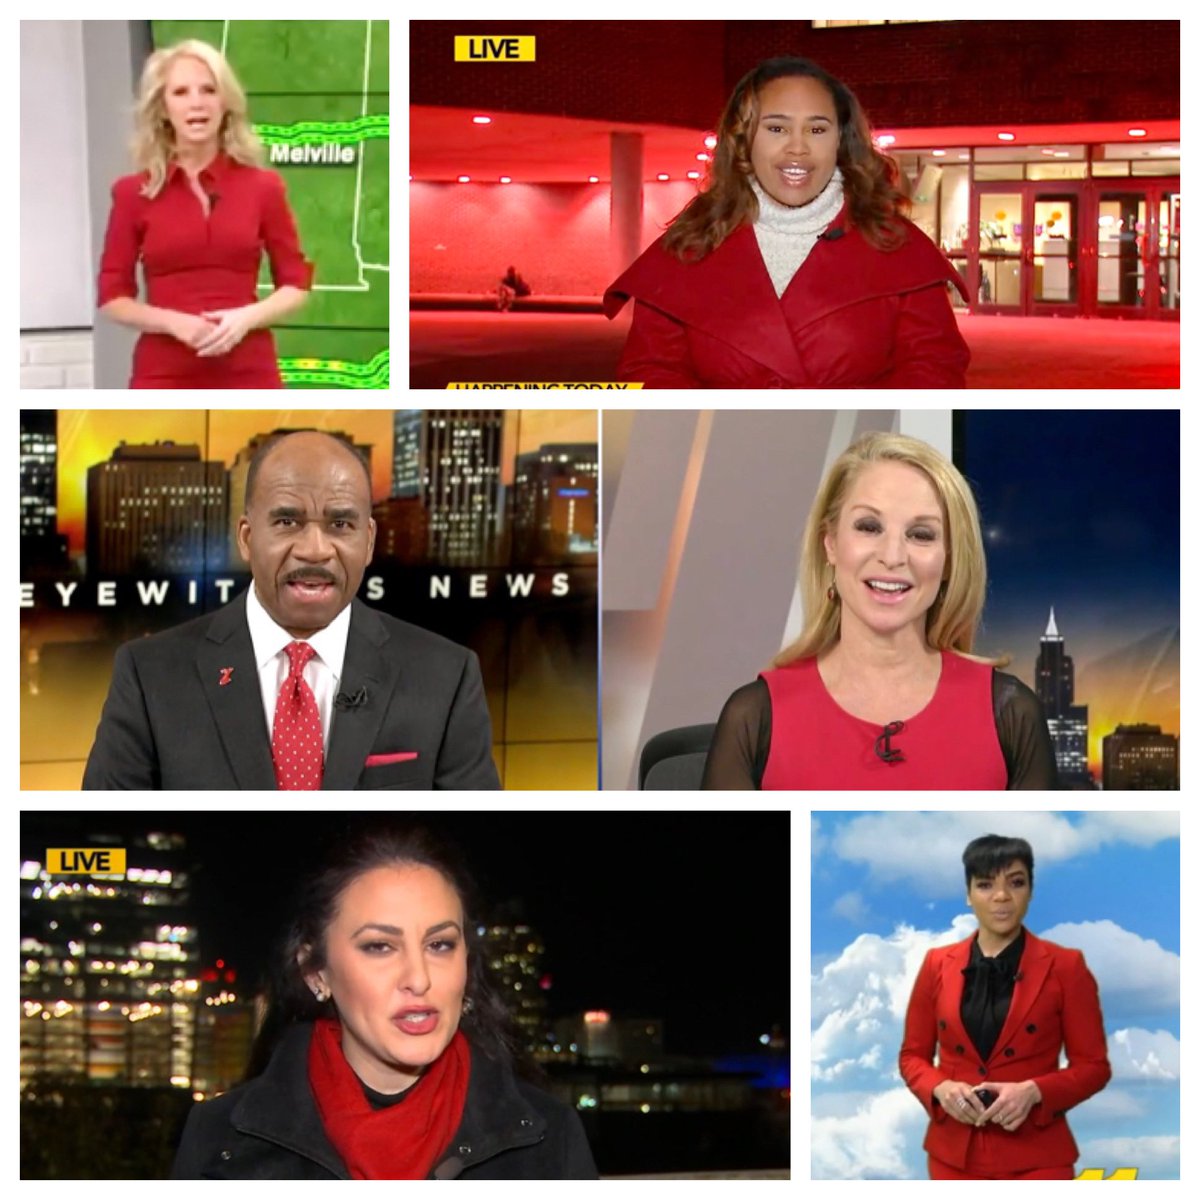 It’s National #WearRedDay and we are representing! We encourage you to wear red to raise awareness about heart disease, which is a leading cause of death in the US.  87 percent of all heart issues are believed to be preventable!
#abc11together